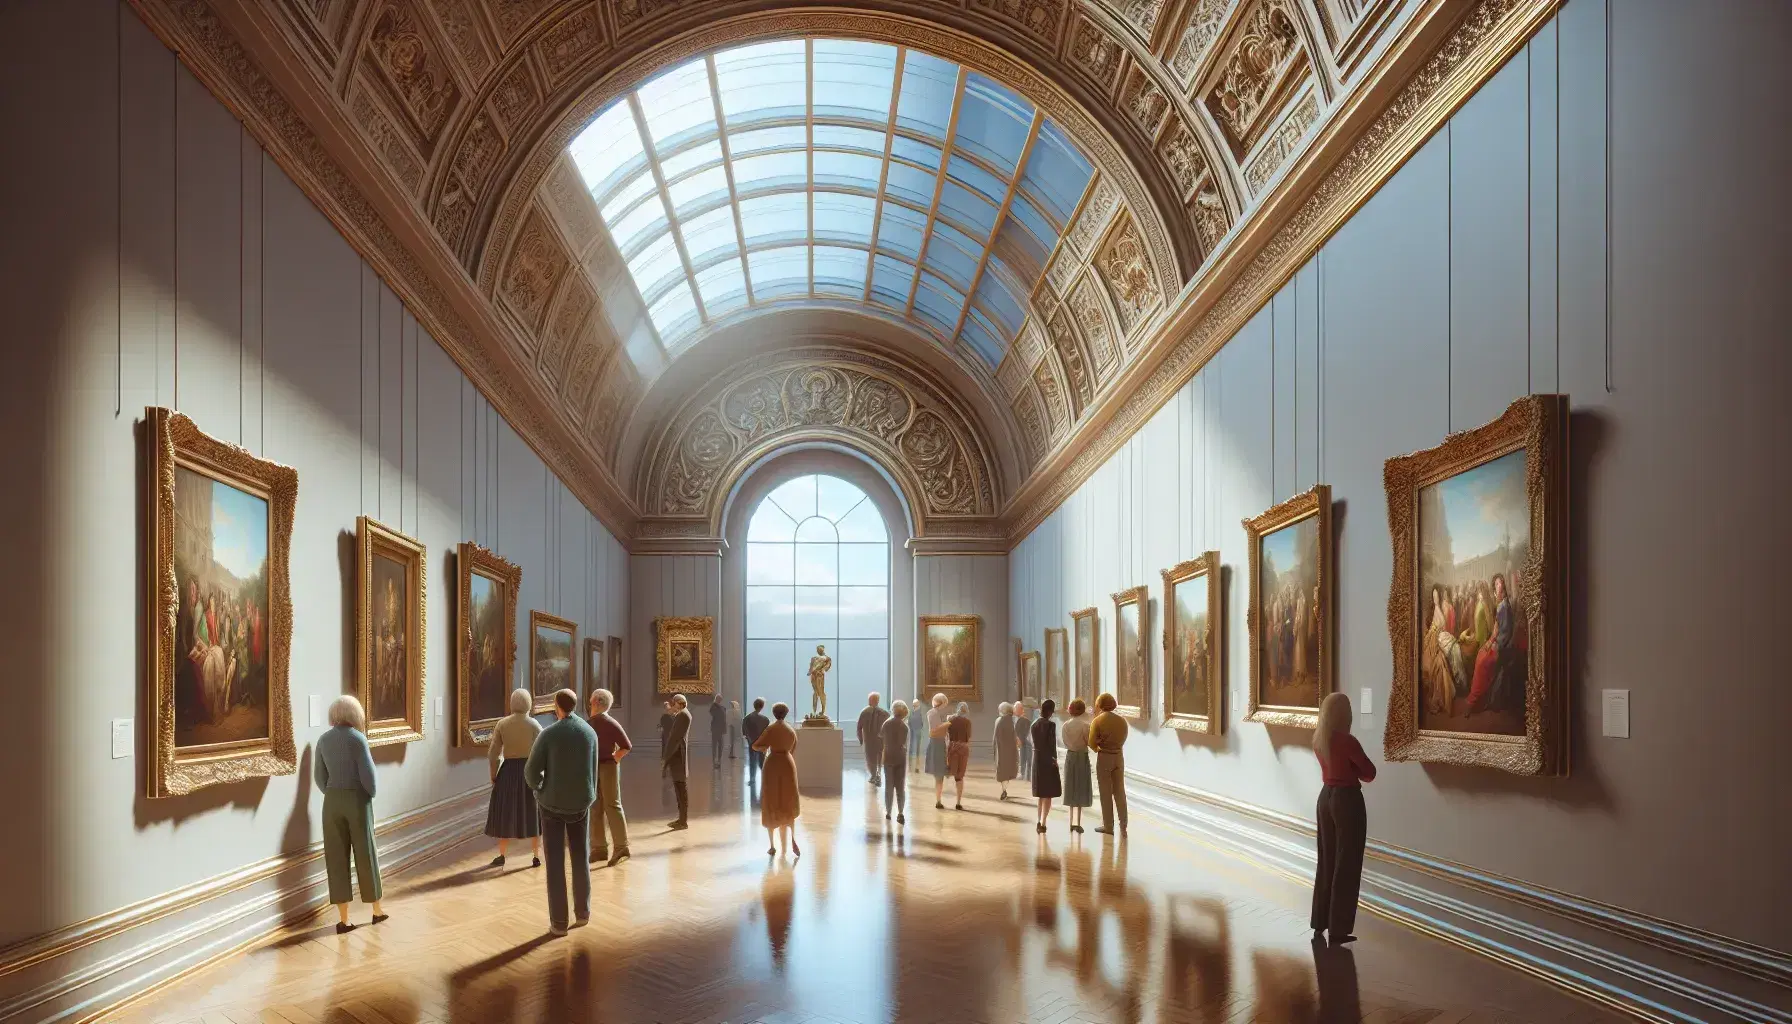 Oil painting depicting a serene art gallery interior with visitors admiring artworks, golden frames on beige walls, and sunlight from an arched window.